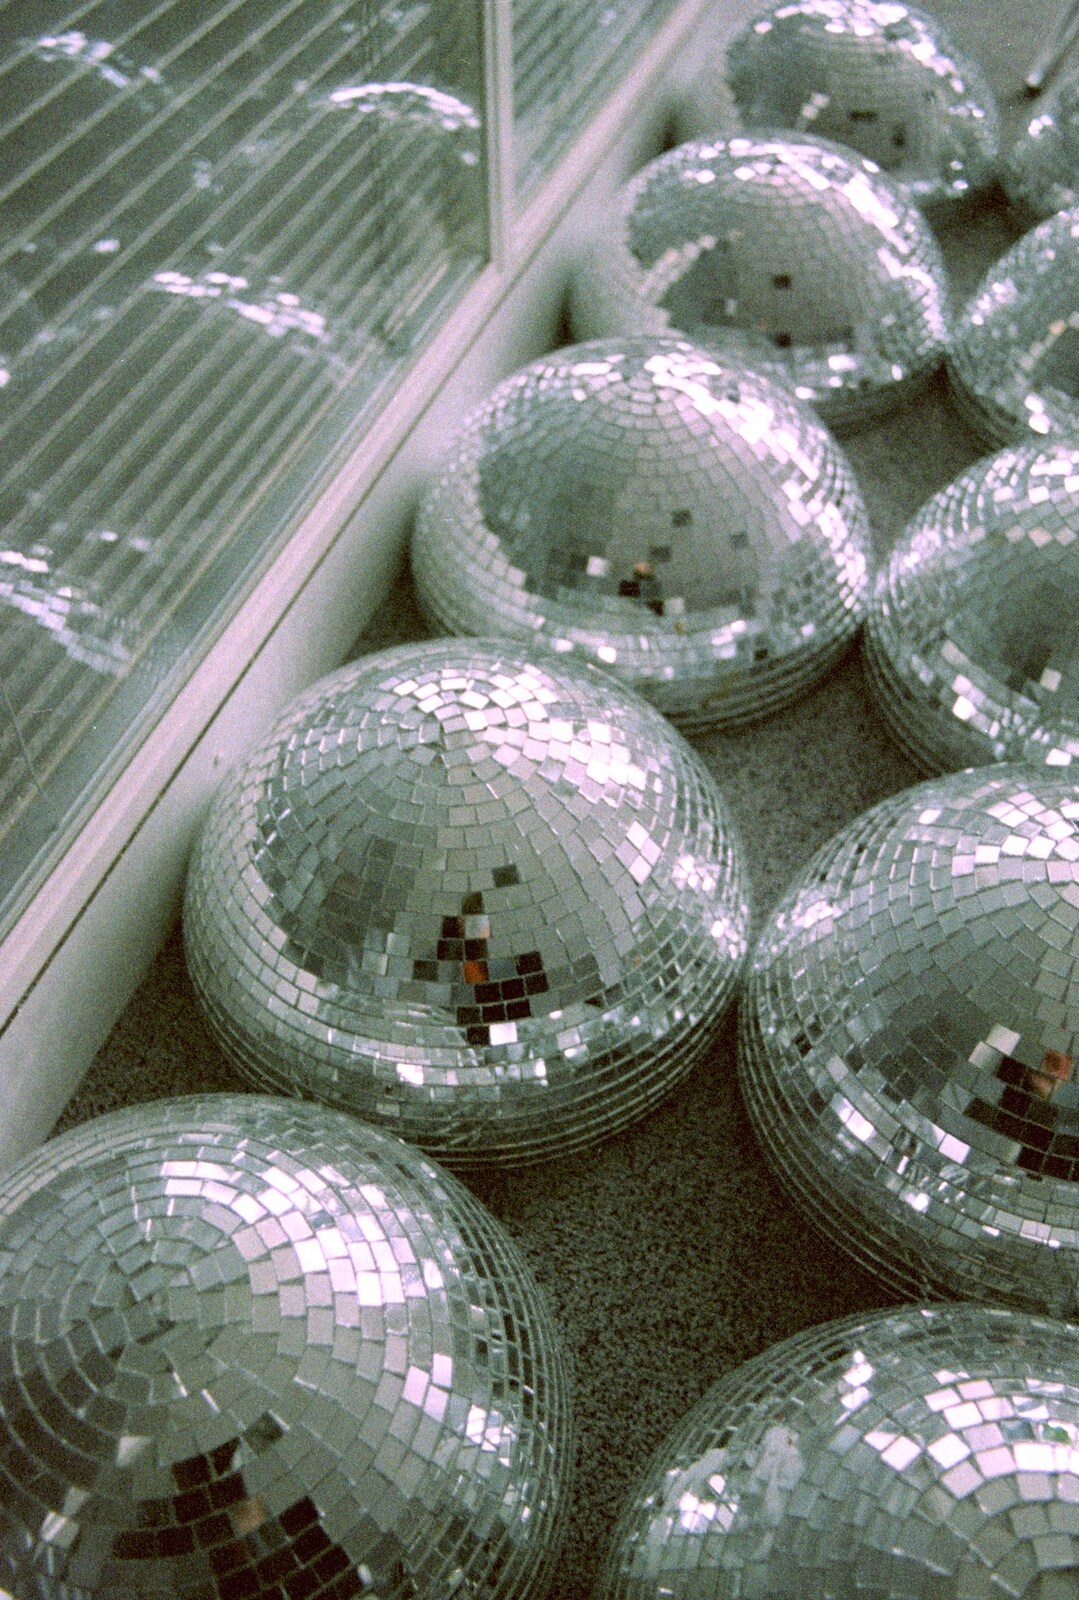 Loads of half-moon glitter balls from 3G Lab Moves Offices, Milton Road, Cambourne and Cambridge - 27th August 2001